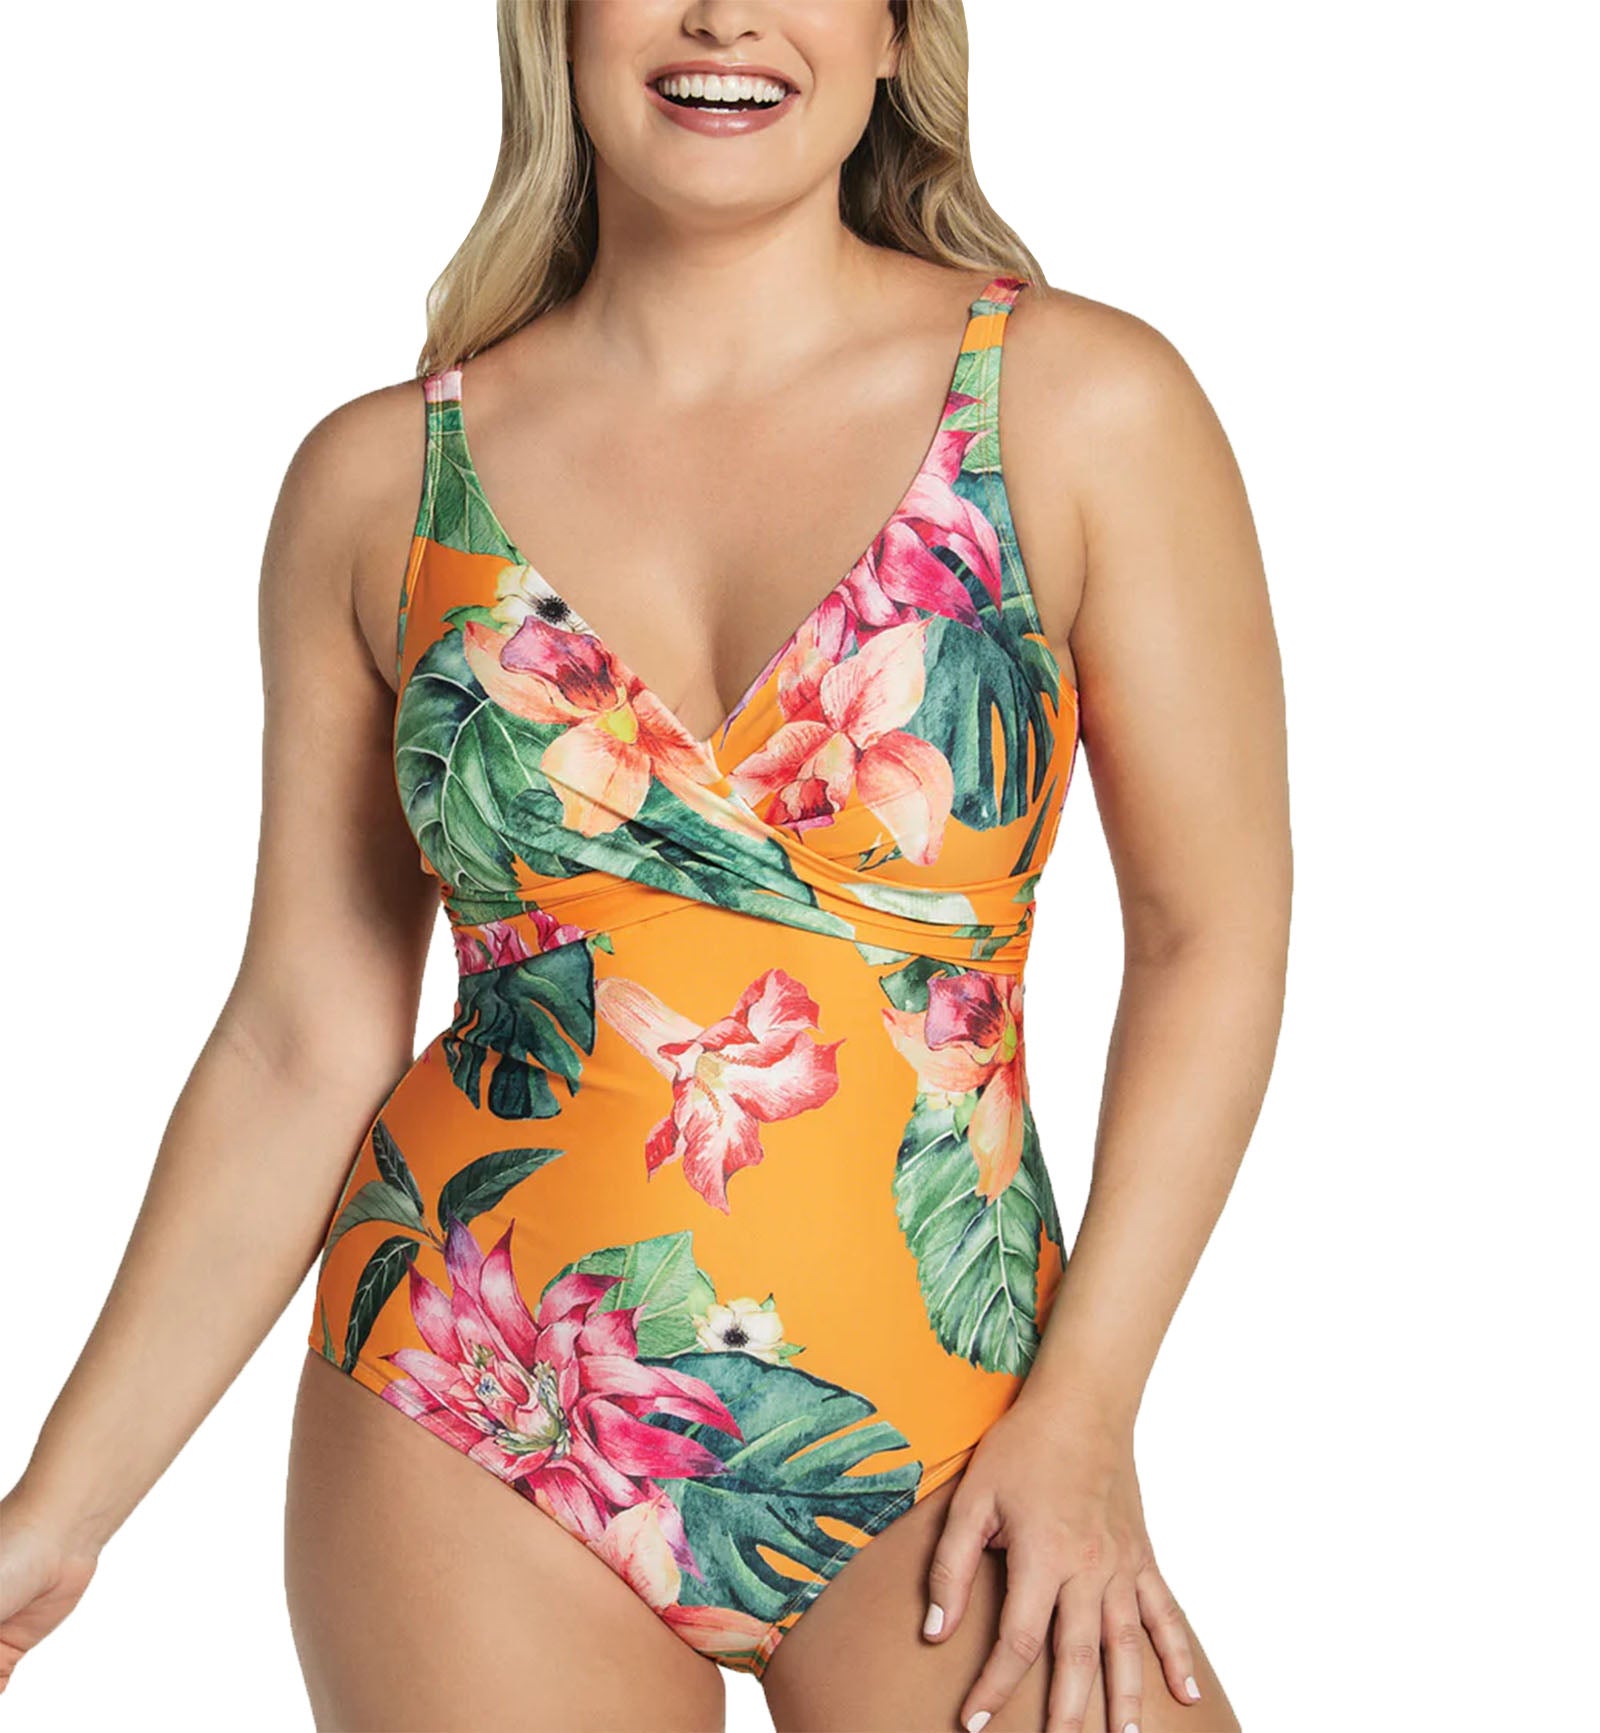 Leonisa Eco-Friendly Low Back One Piece Slimming Swimsuit (19A071P),Small,Orange Leaves Print - Orange Leaves Print,Small